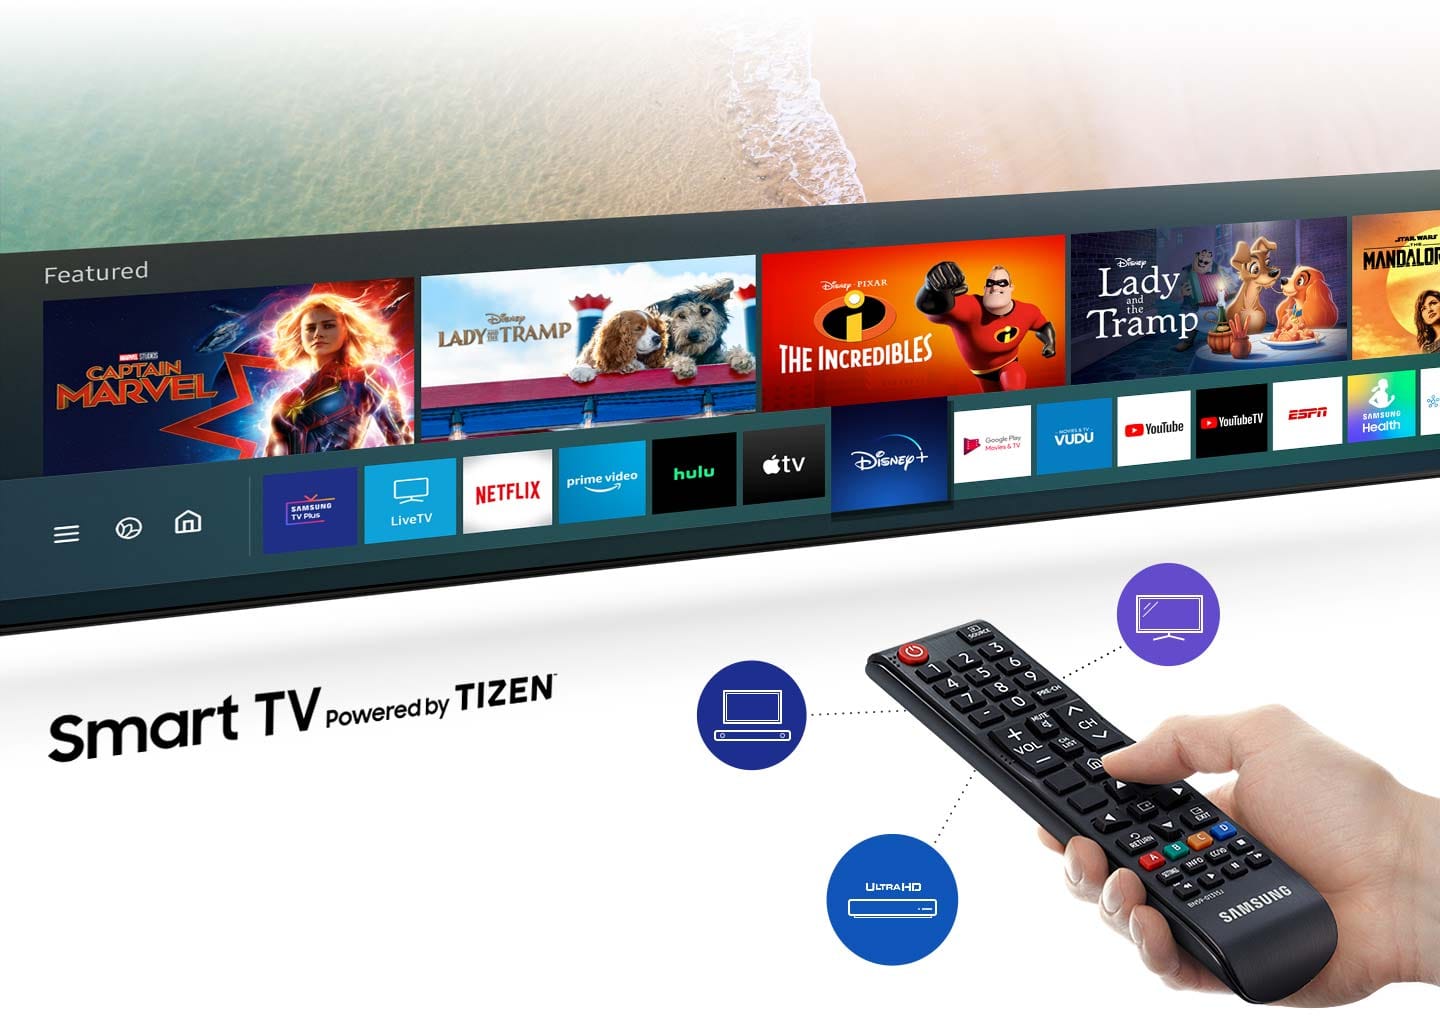 Samsung Smart TV 55 inch 4K UHD UN55TU7000FXZA This Samsung SmarTV offers you the entertainment and performance you need, it has an ultra-fast Crystal processor that transforms the image into 4K and Full HD, plus sharper contrasts in dark colors  -397944